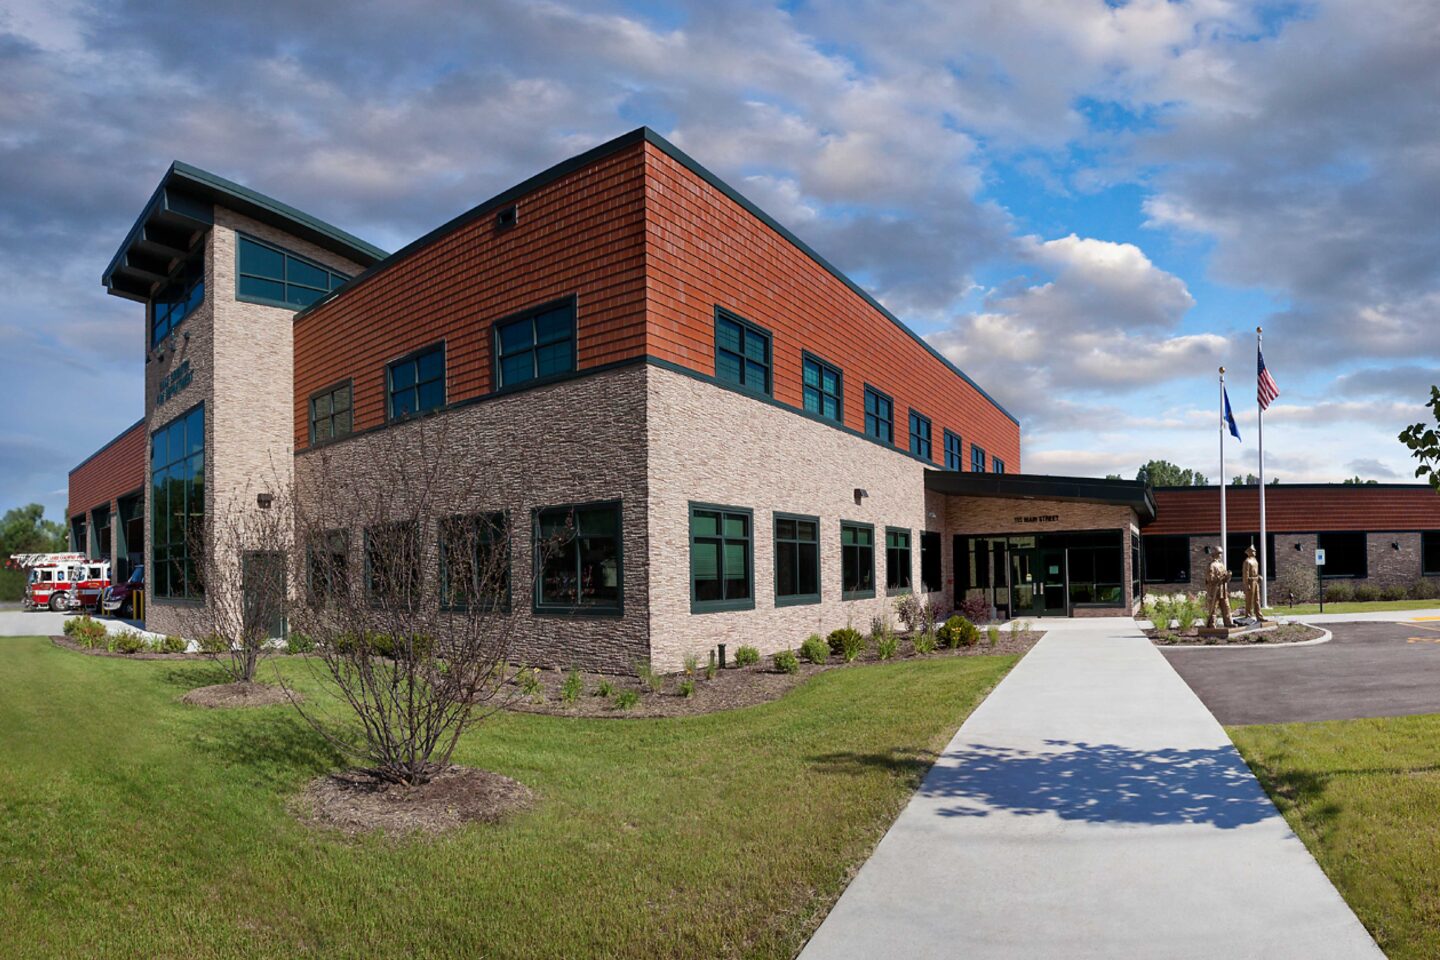 Wide exterior perspective of a modern public safety building and surrounding landscaping in Delafield